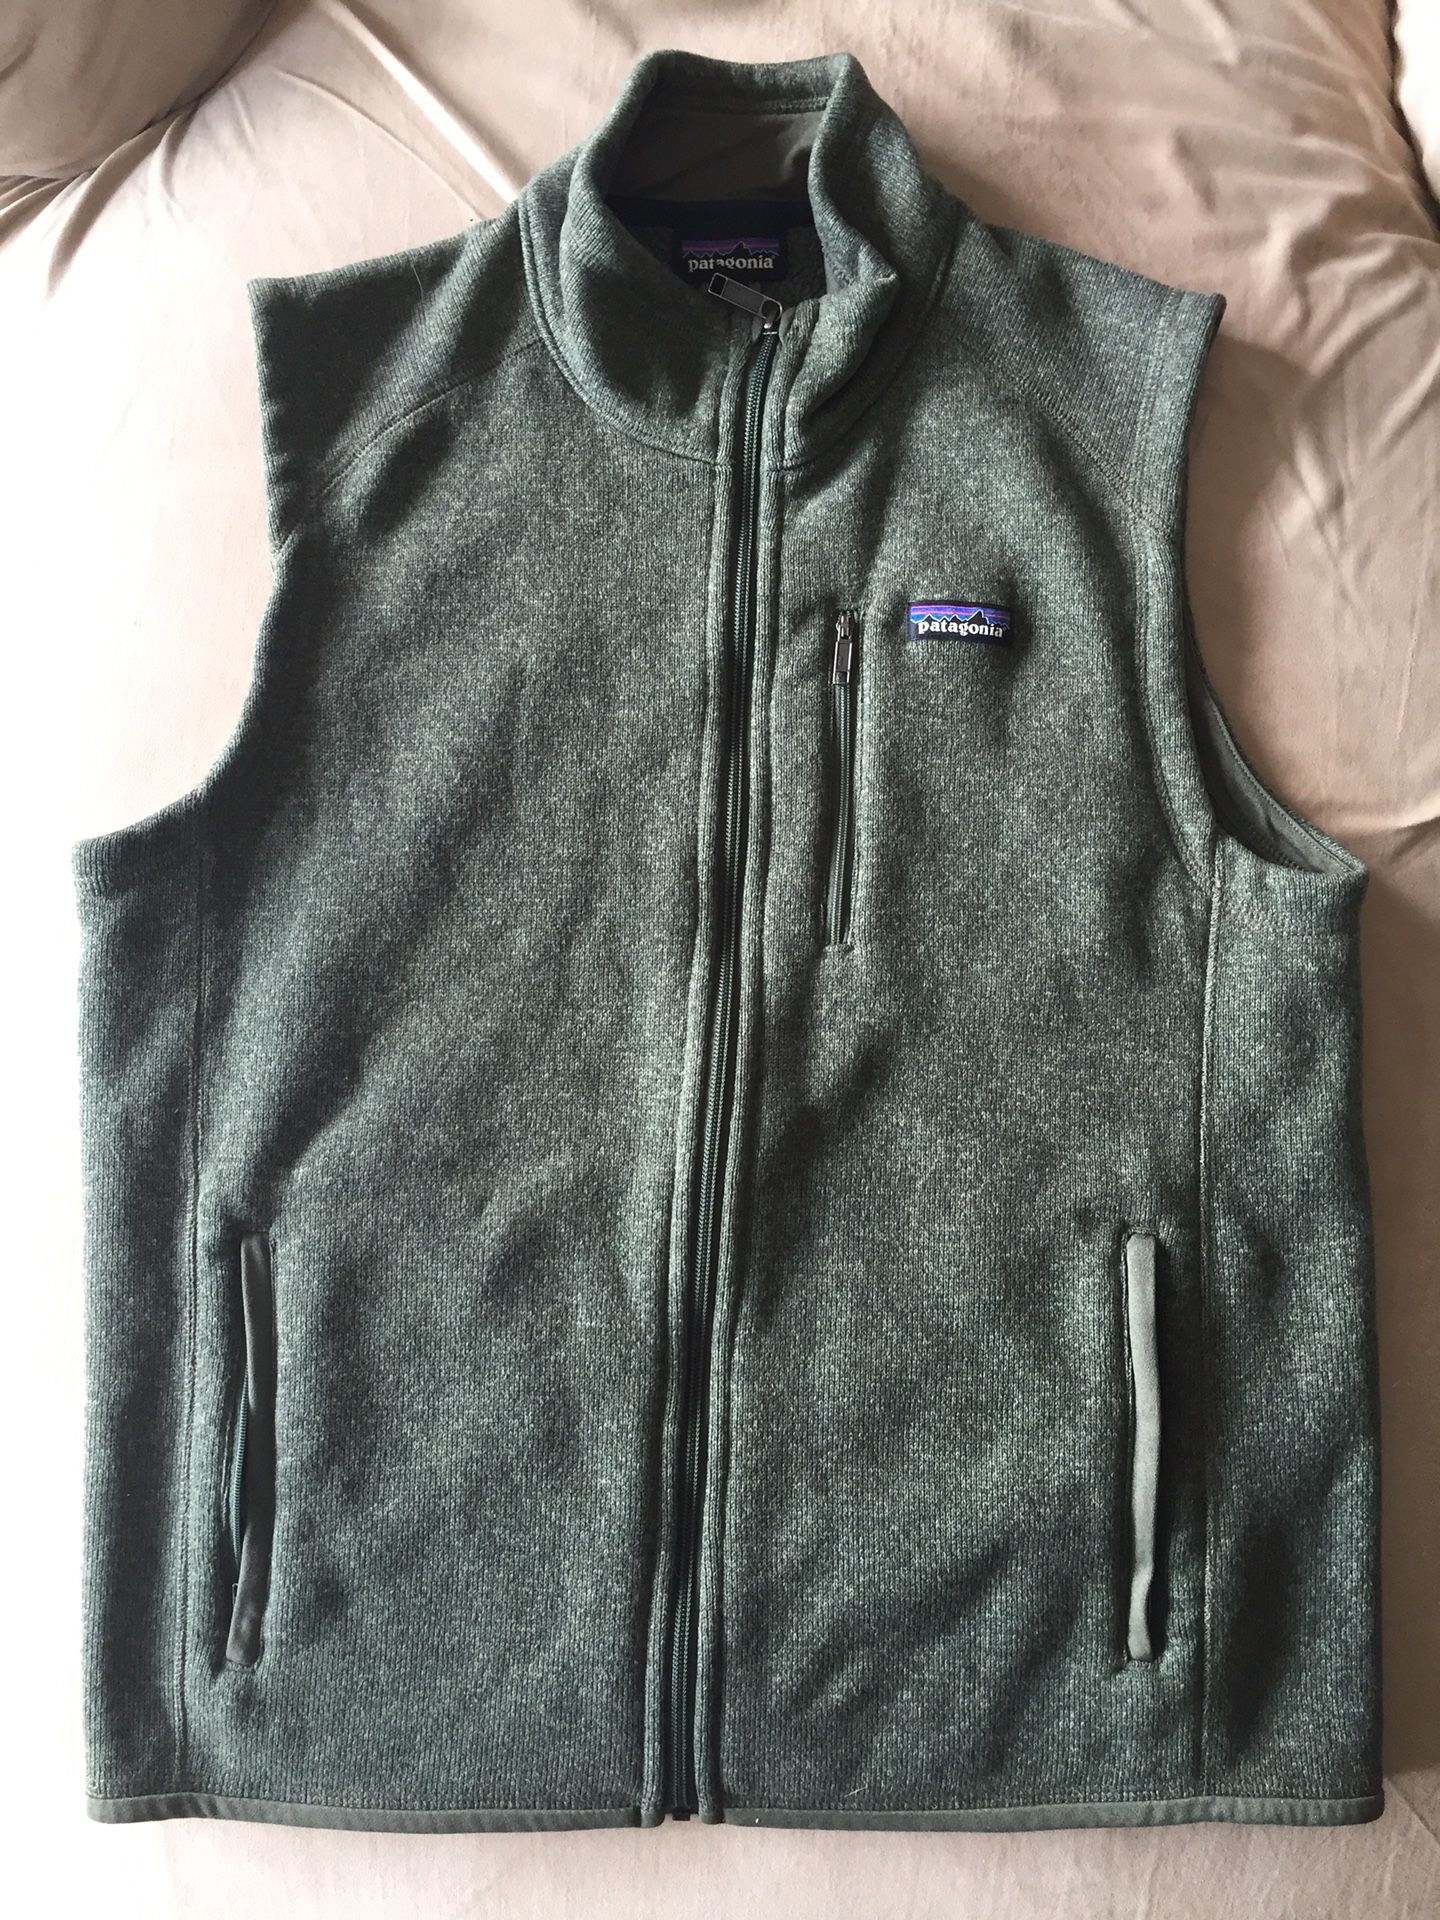 Brand New Patagonia - Better Sweater Vest